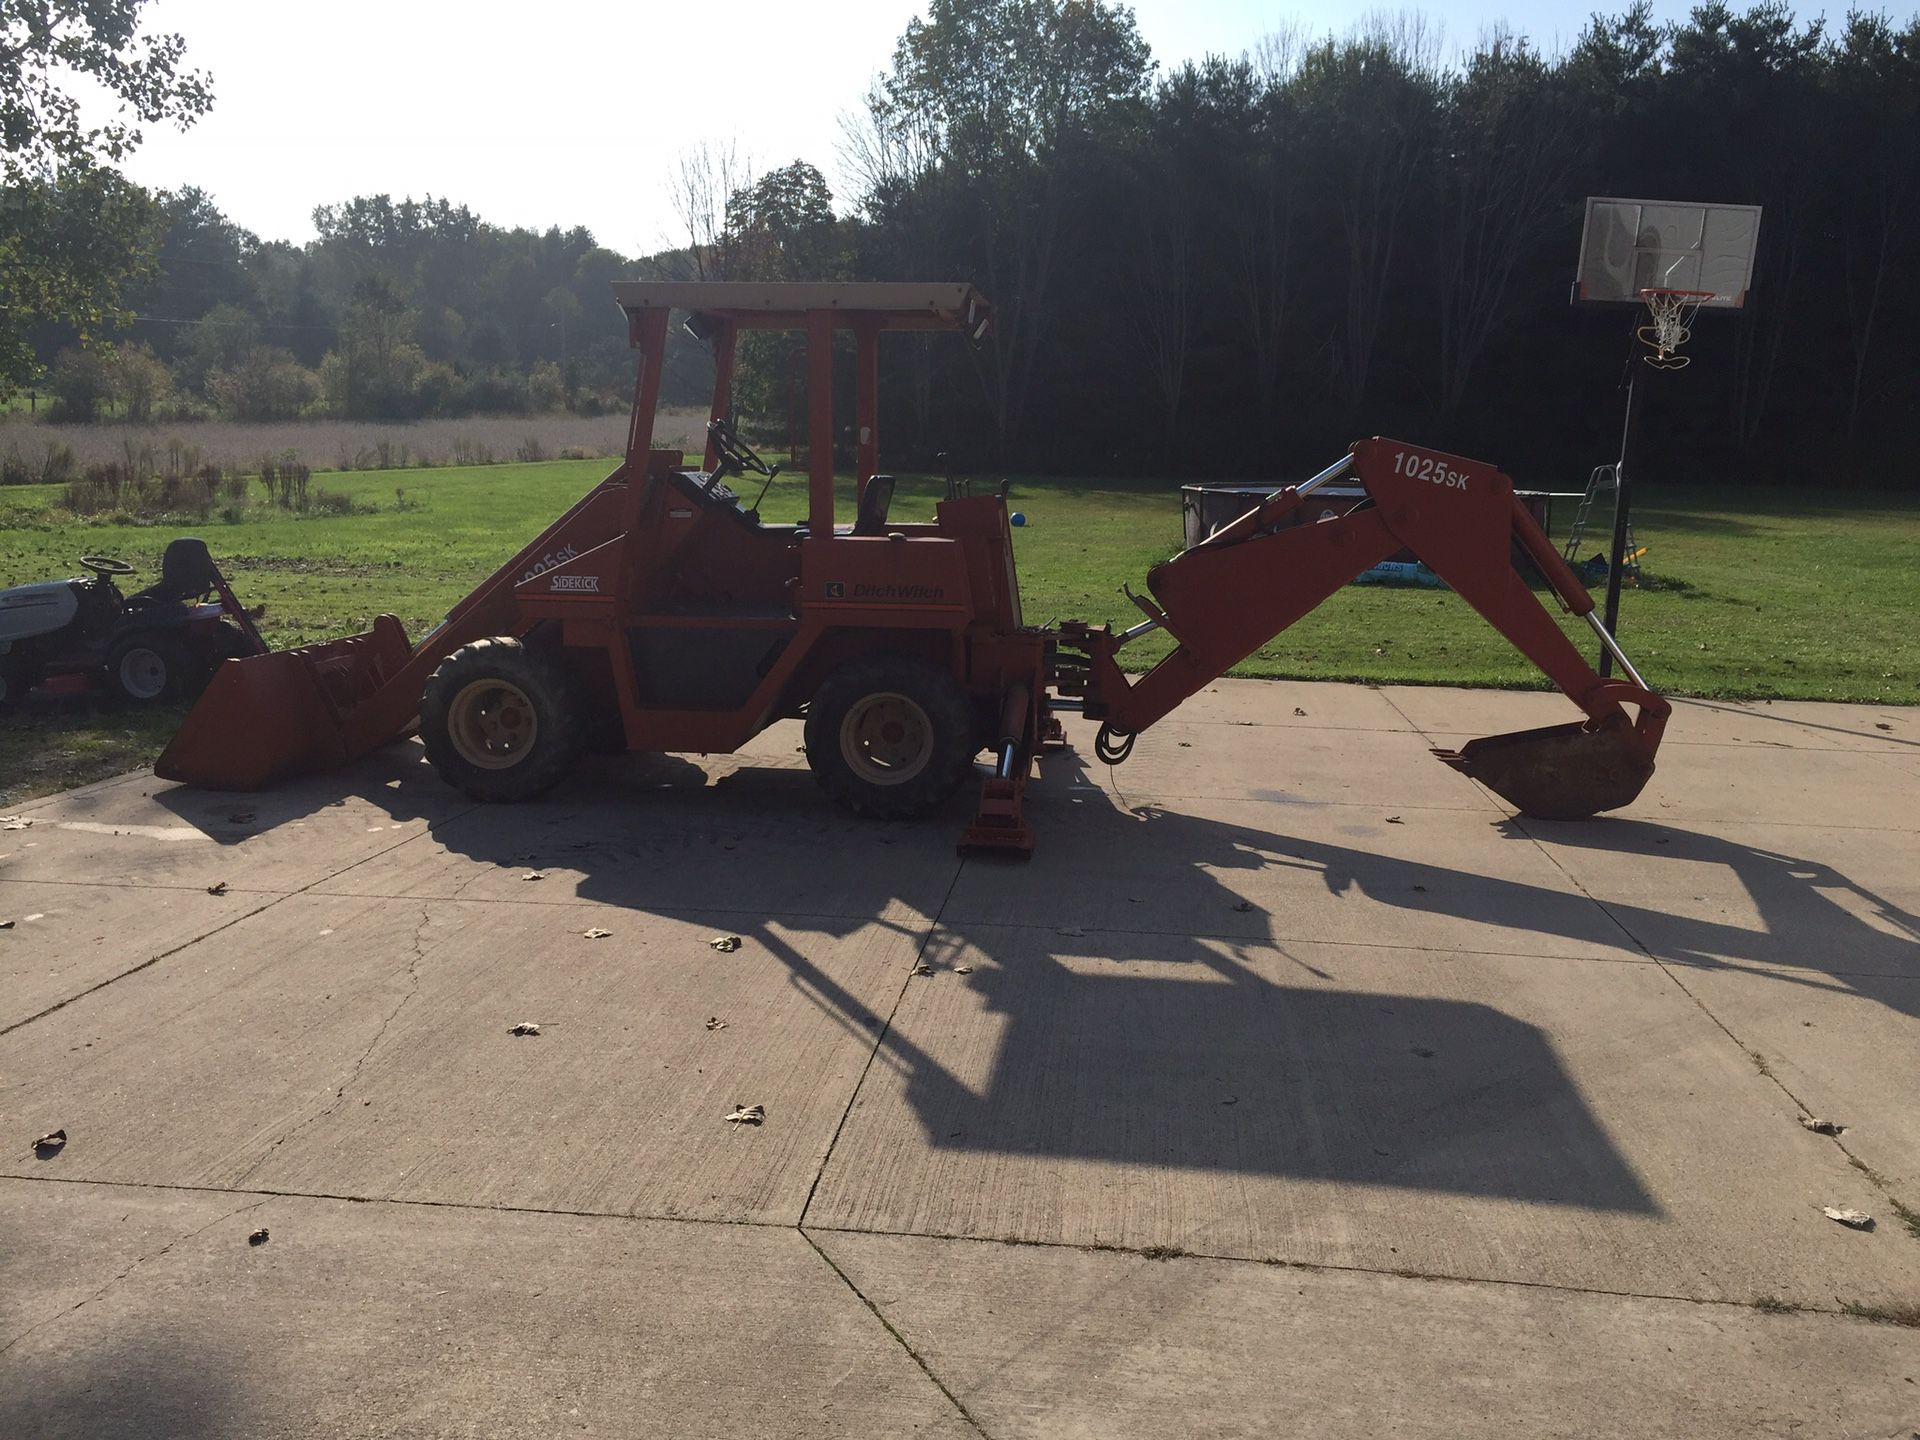 Ditch Witch backhoe